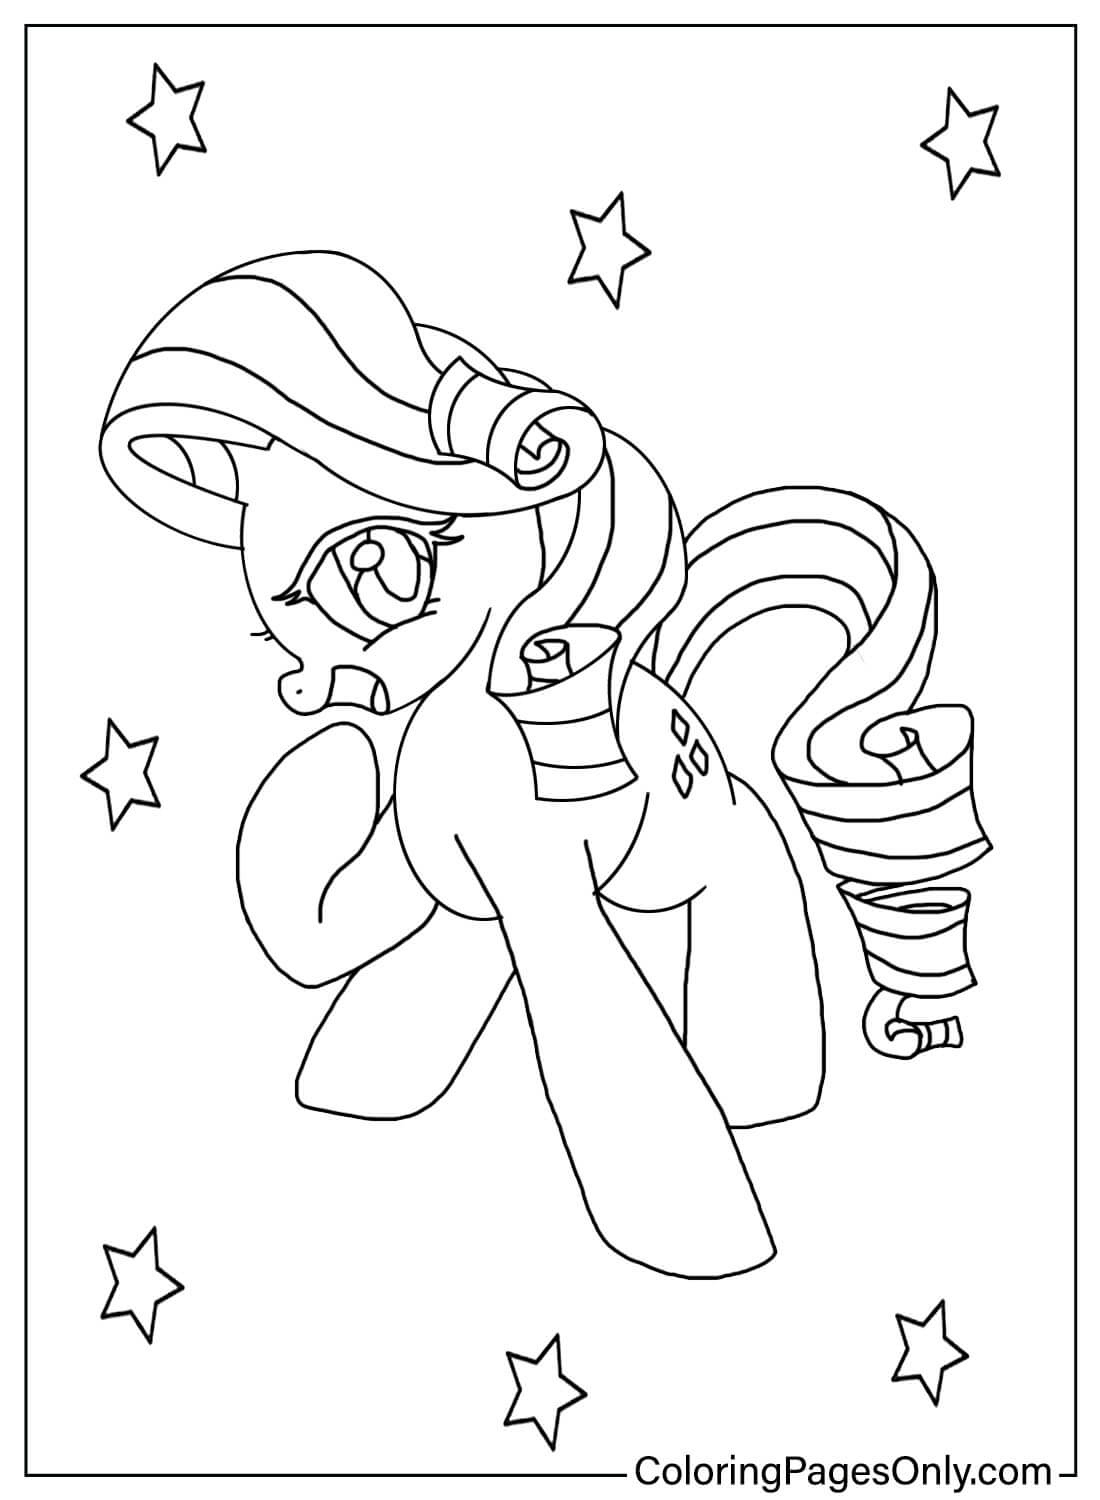 Rarity Coloring Page Printable from Rarity